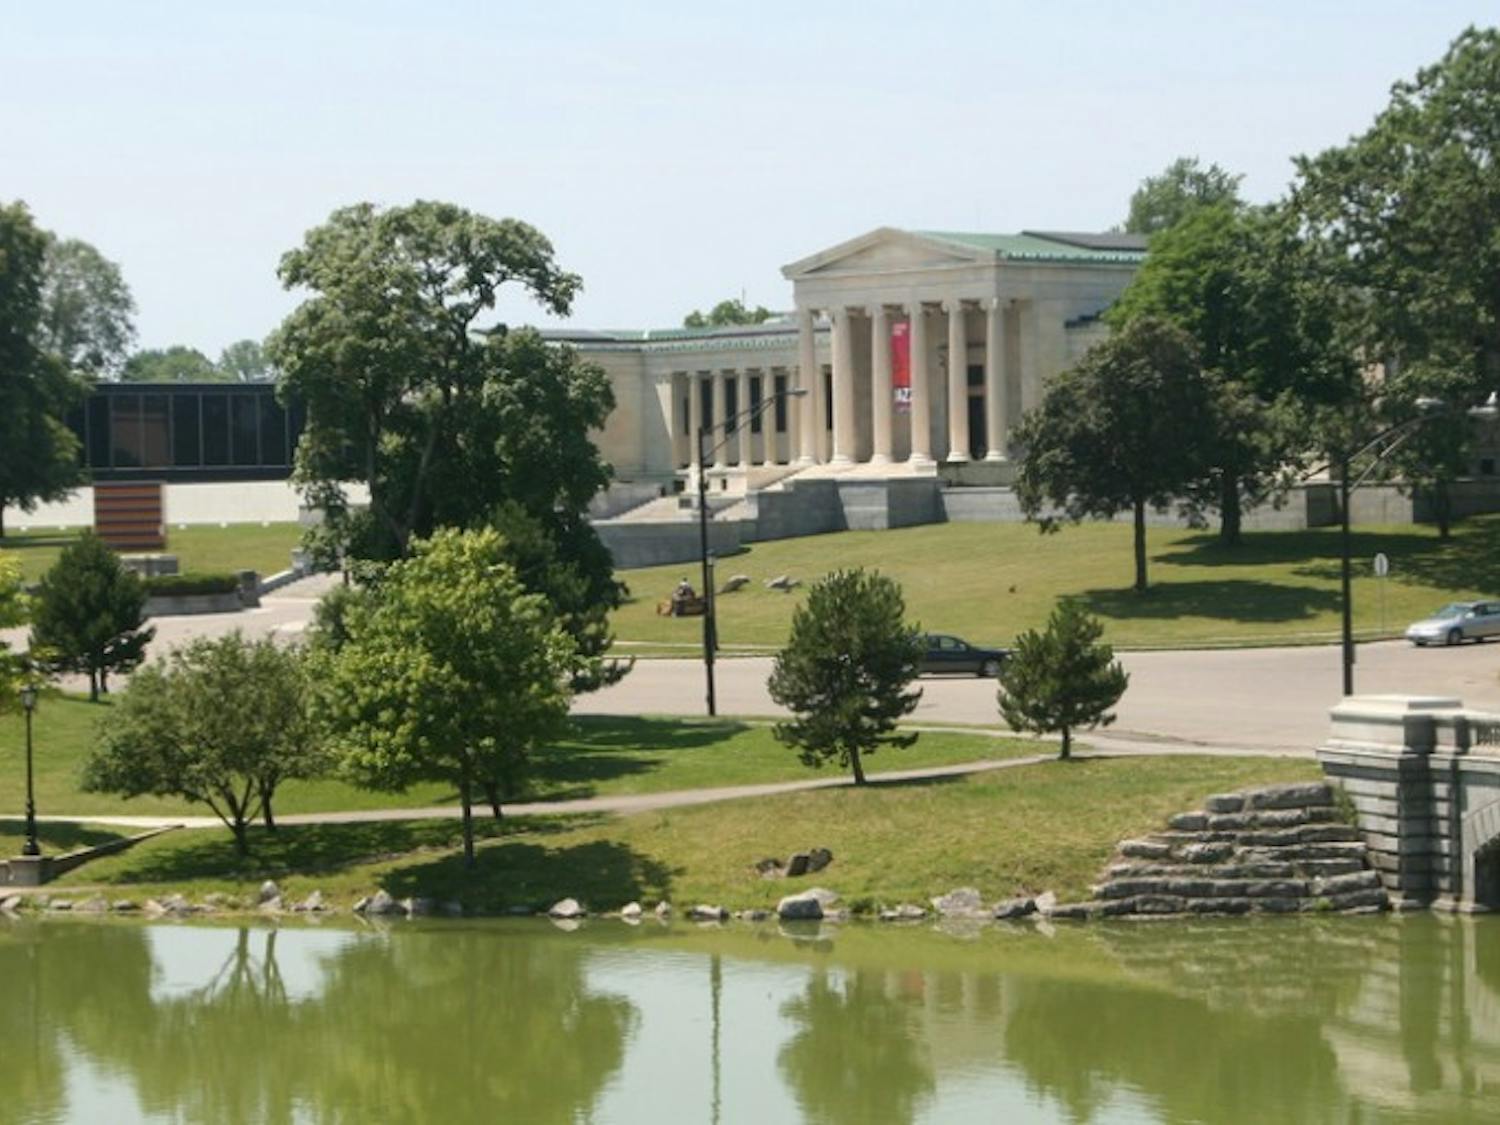 The Albright-Knox Art Gallery is a staple of Buffalo's culture with artwork from Picasso’s Harlequin, to the early Cubist masterwork Danseuse au Café by Jean Metzinger. 